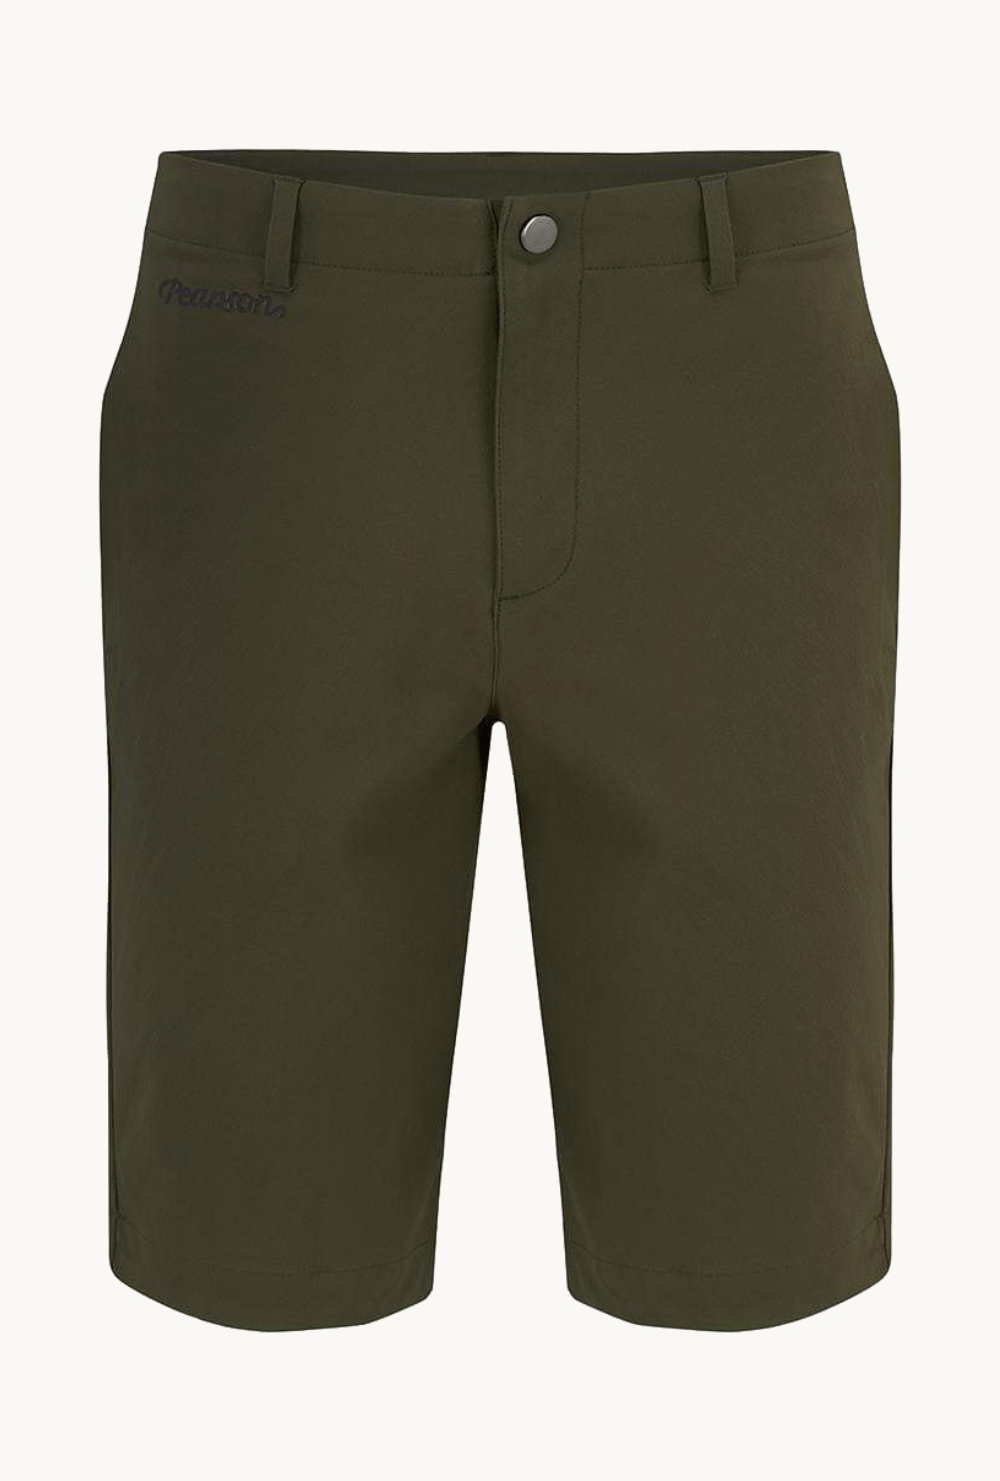 Pearson Cycles Pearson 1860, Kick Back - Urban Commuter Shorts Olive, XX-Large 38" / Olive